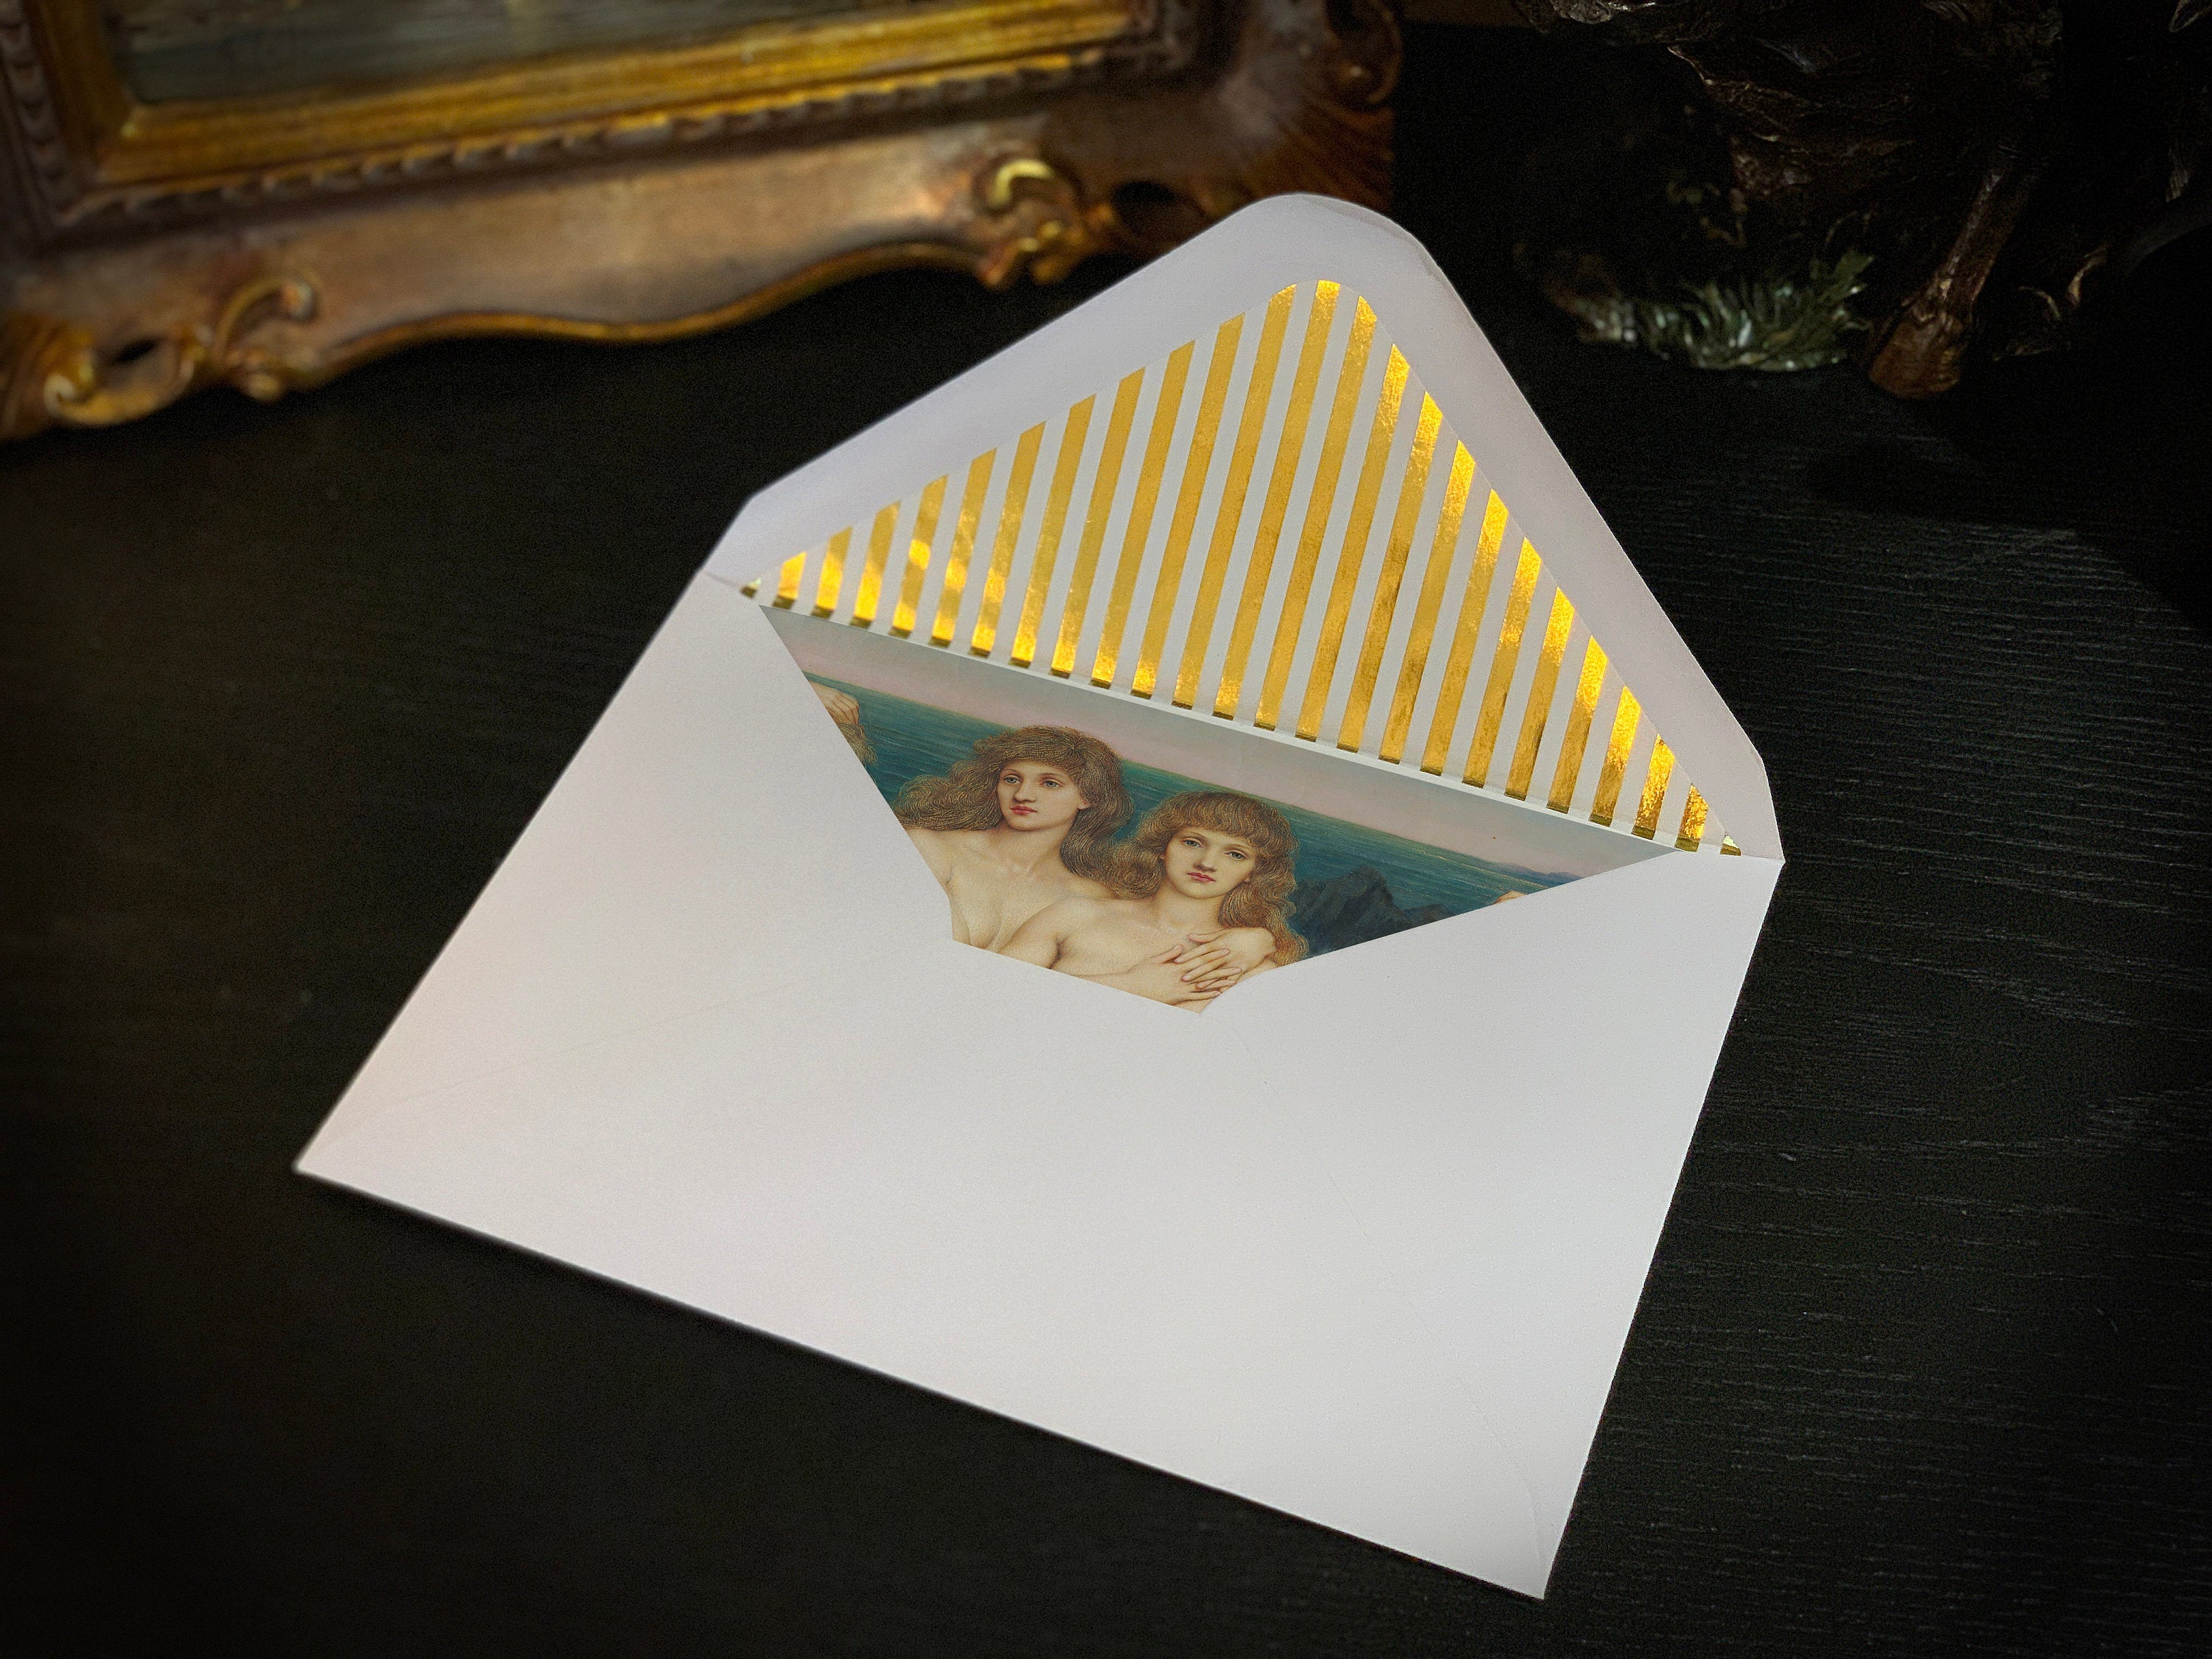 The Sea Maidens, Mermaid Greeting Card with Elegant Striped Gold Foil Envelope, 1 Card/Envelope